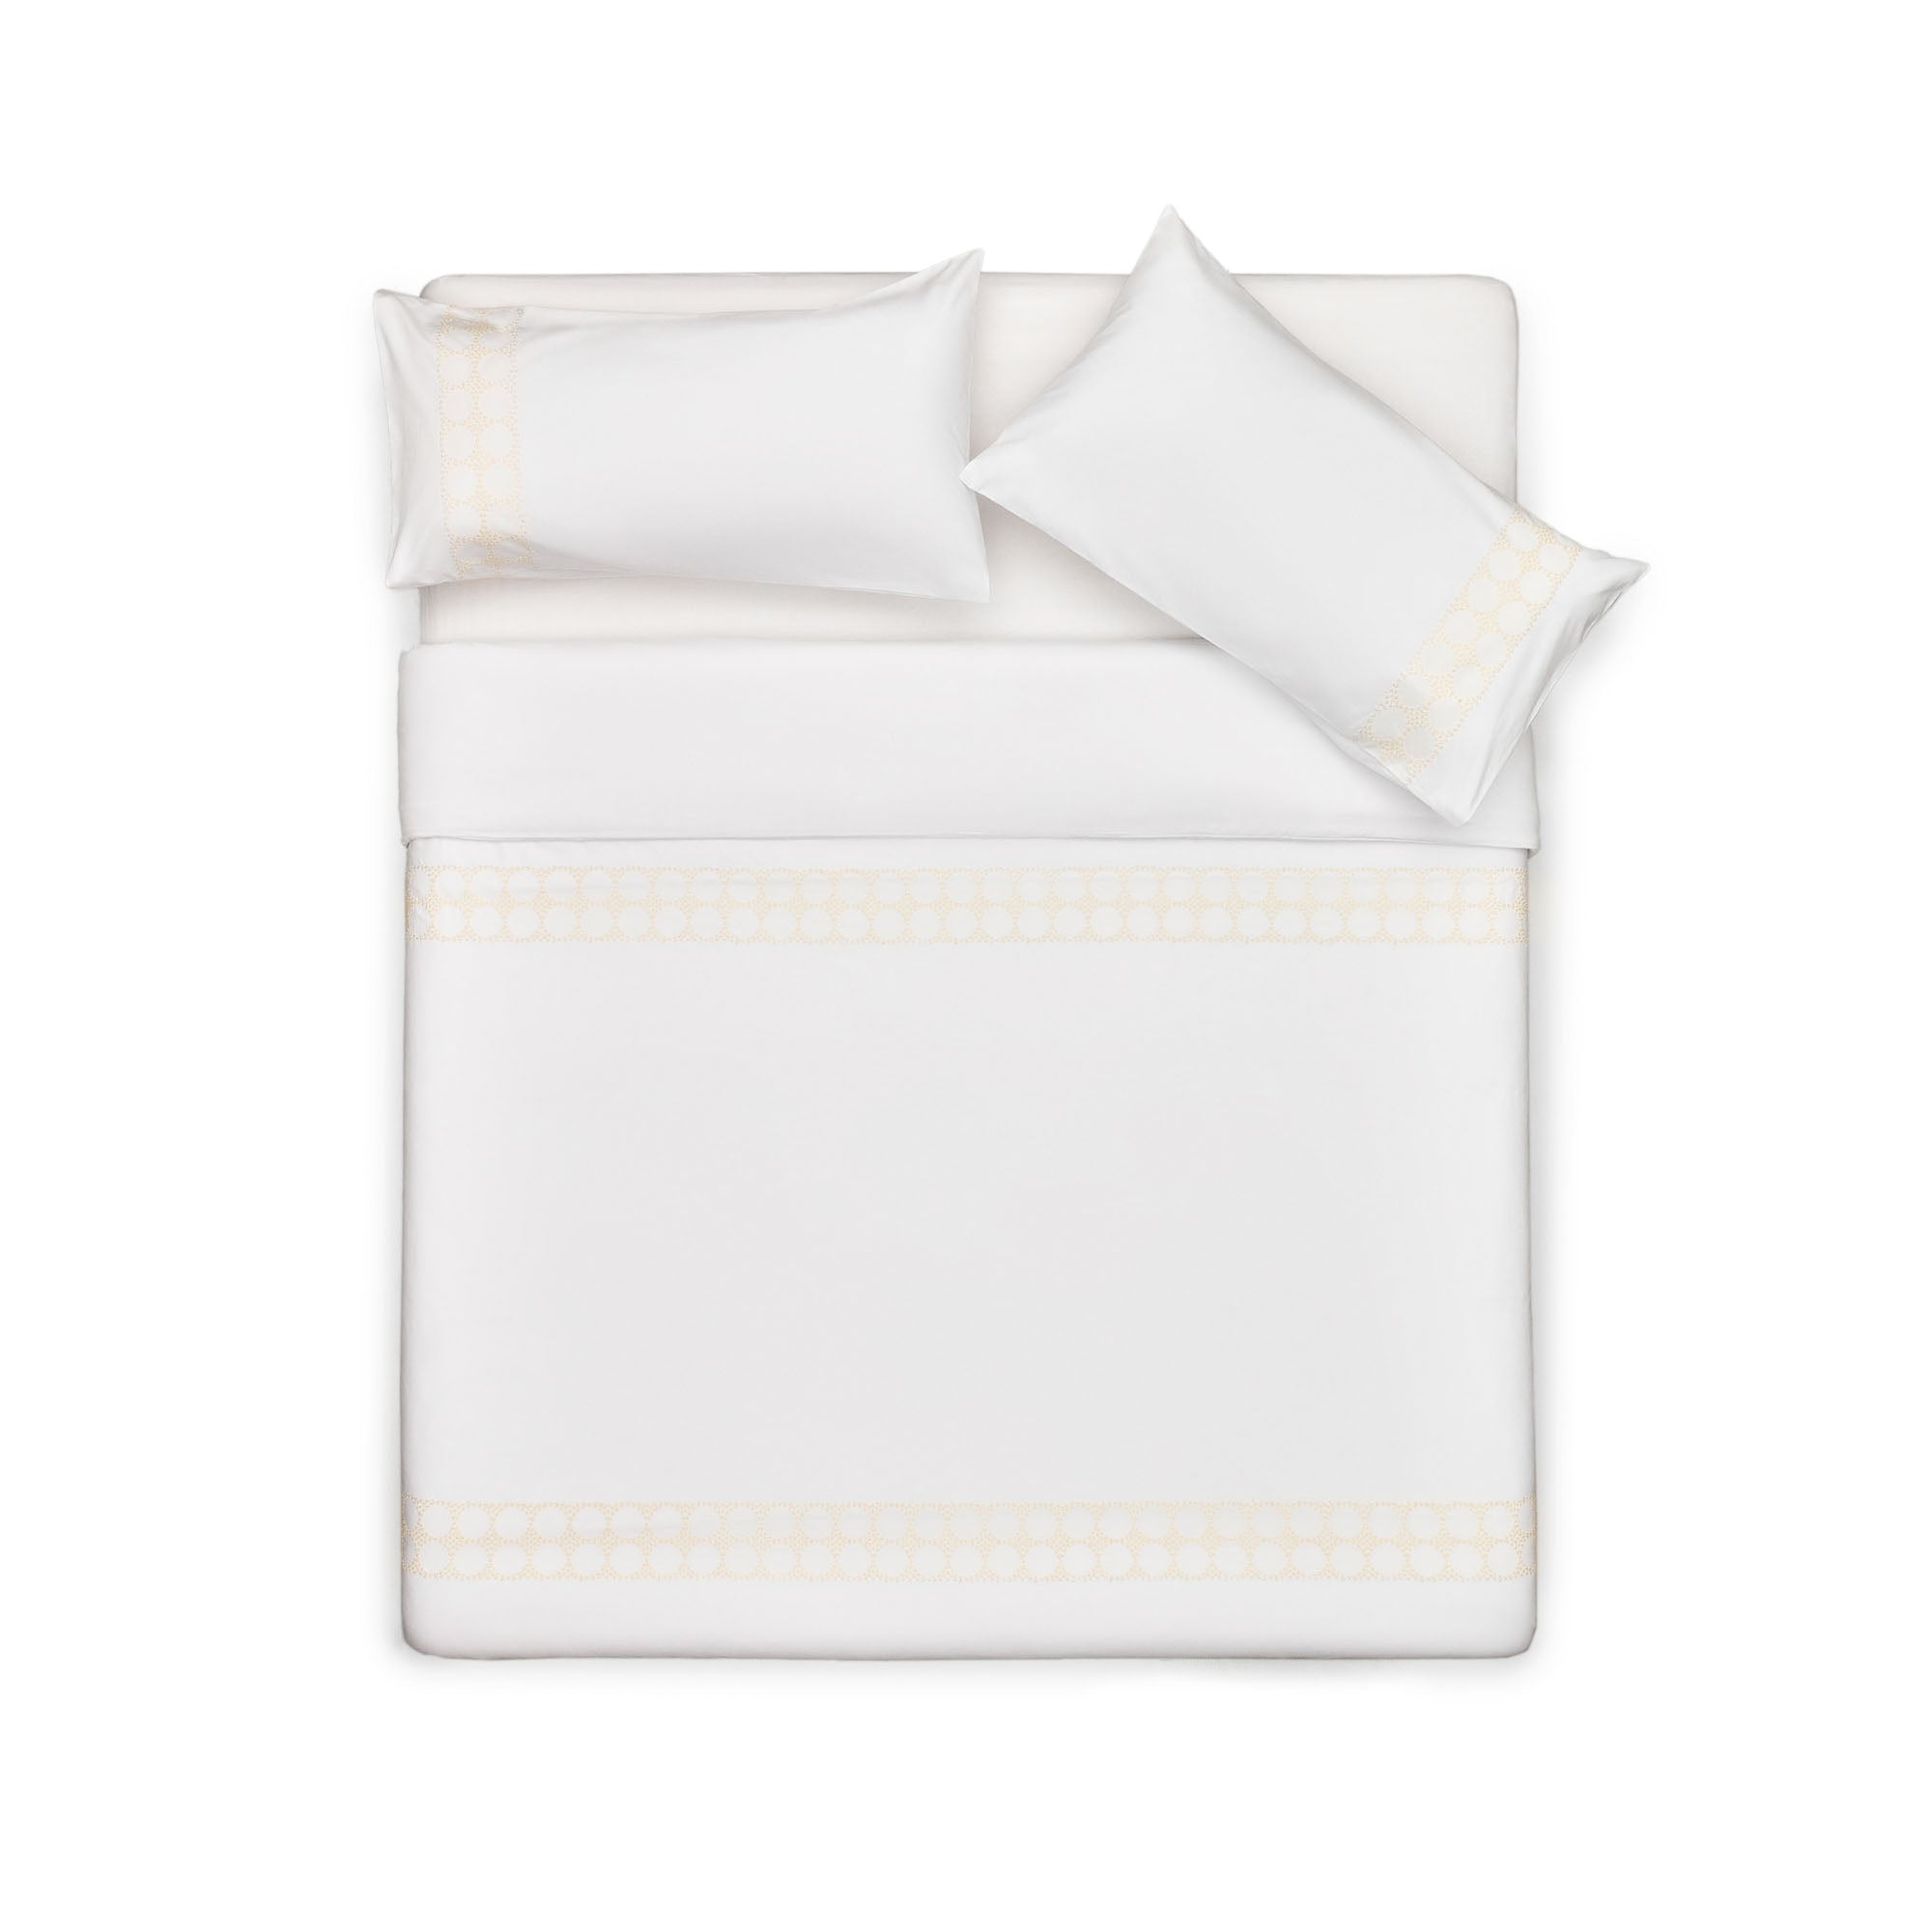 Teia cotton percale duvet cover and pillowcase set in white with floral embroidery, 135x200cm